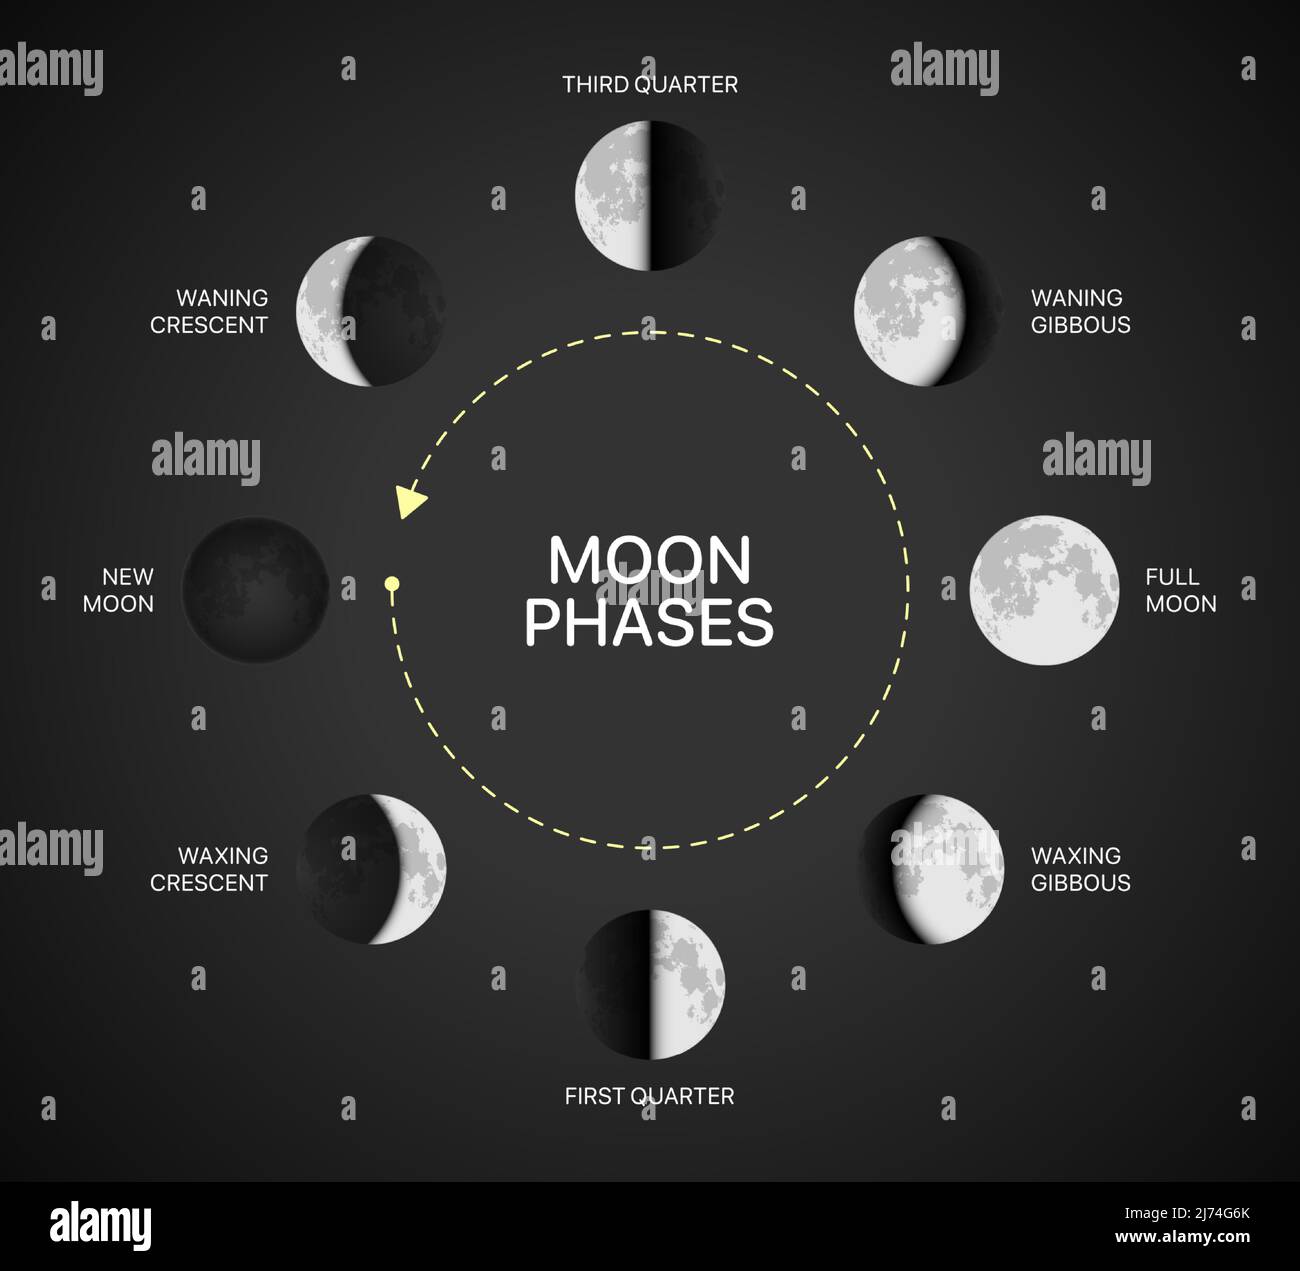 Moon Cycles in Blox Fruits Explained